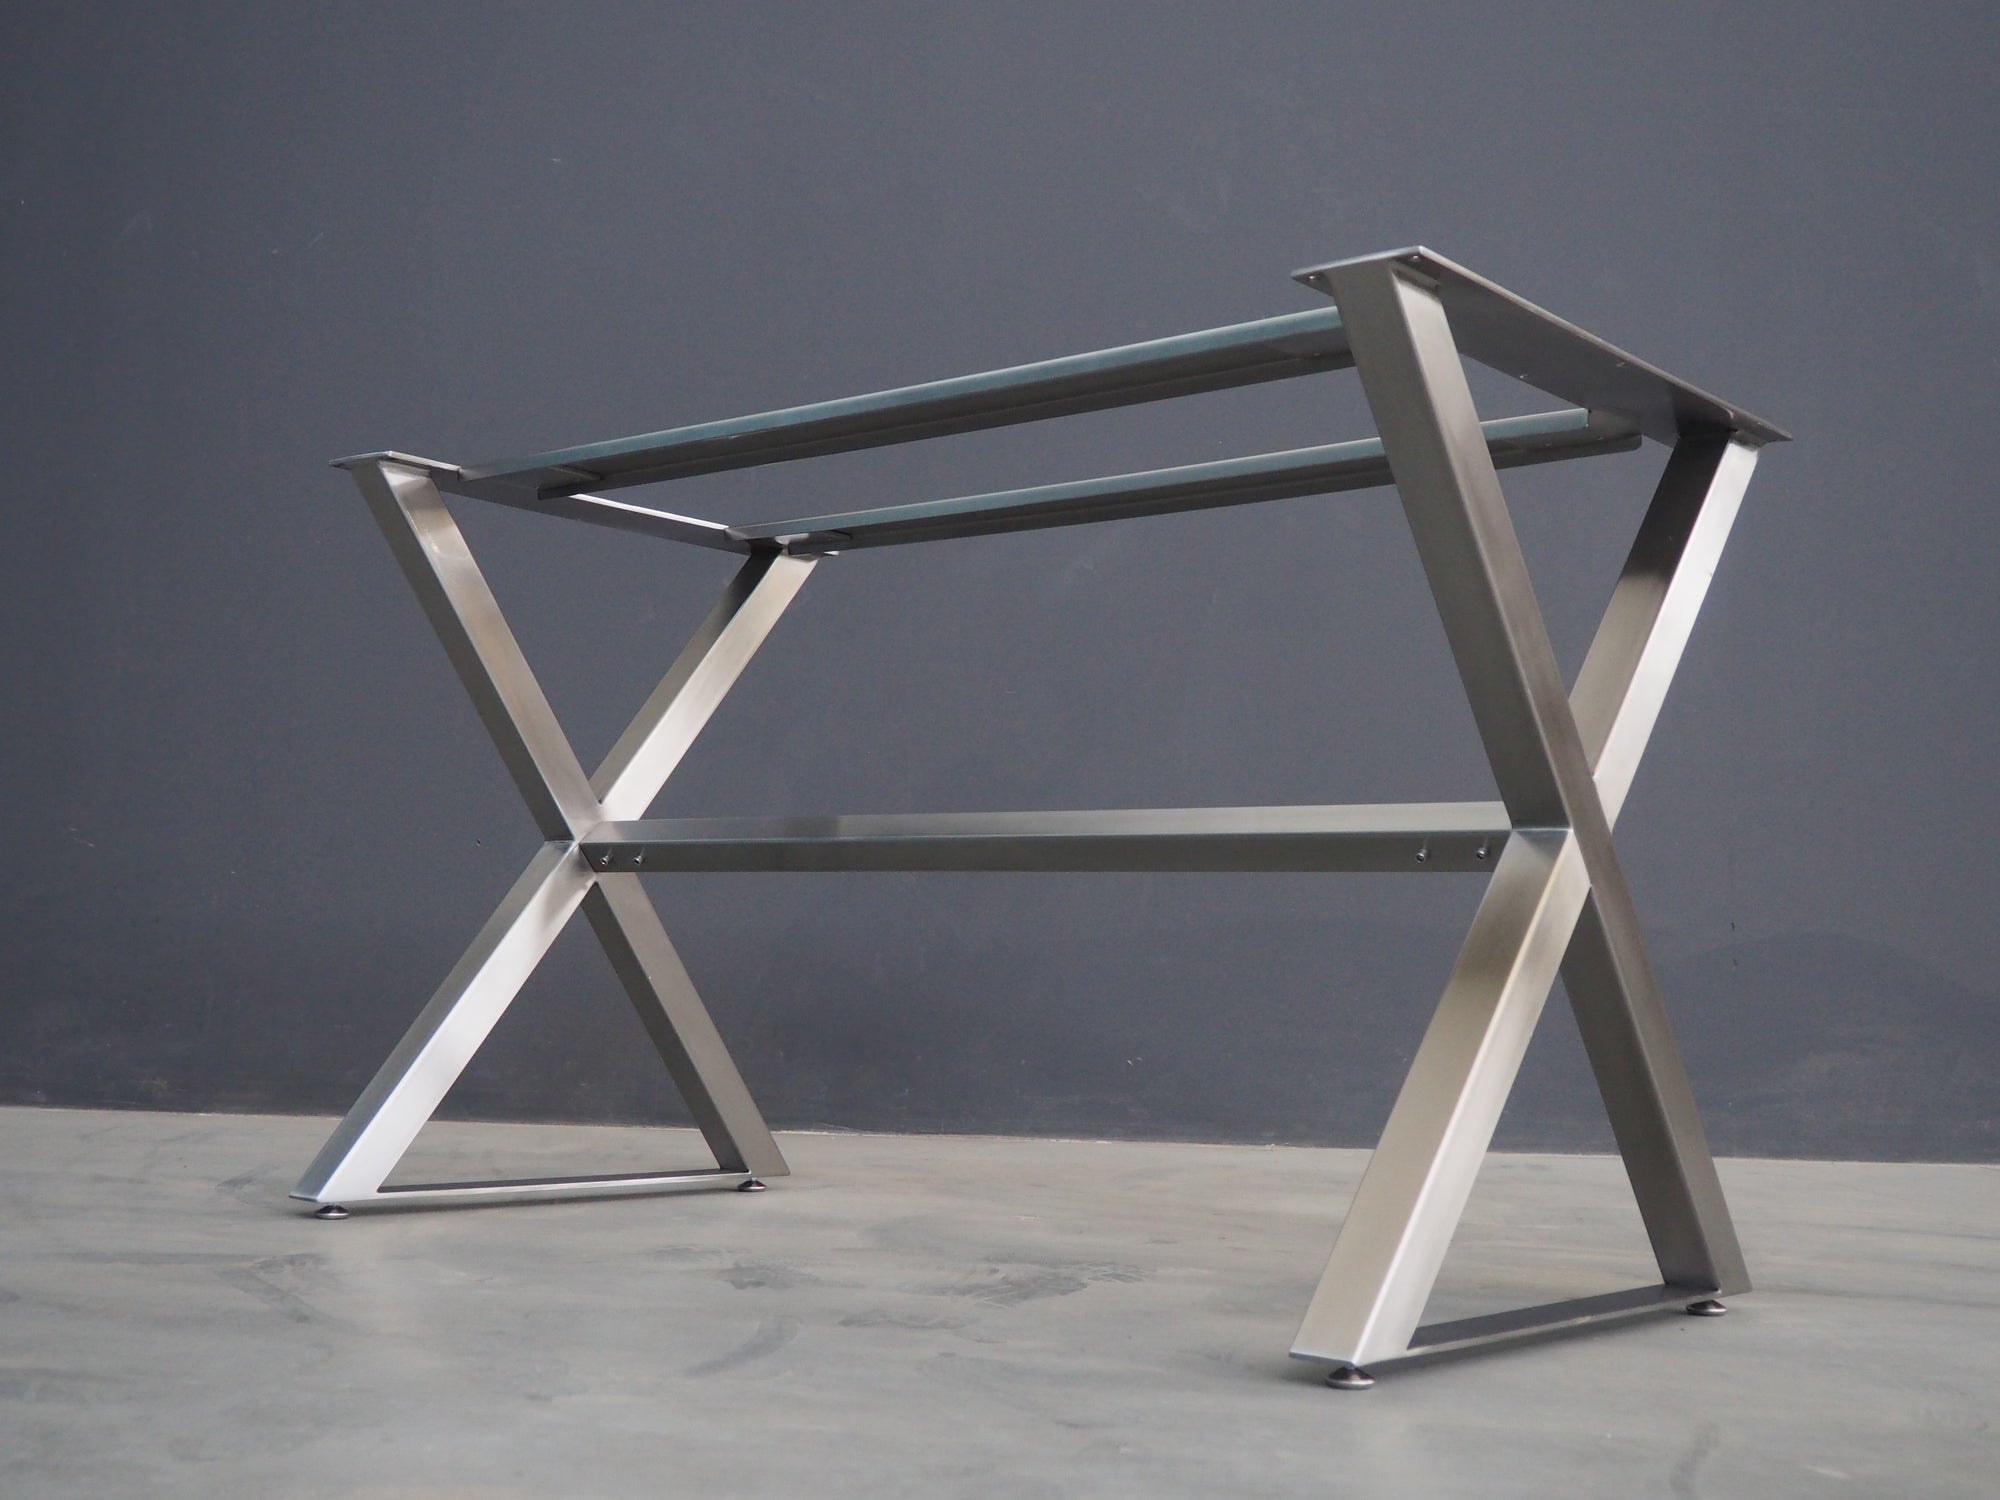 28" X 24" Apart 42" X Frame Long Table Base, Stainless Steel, Height 26" 32